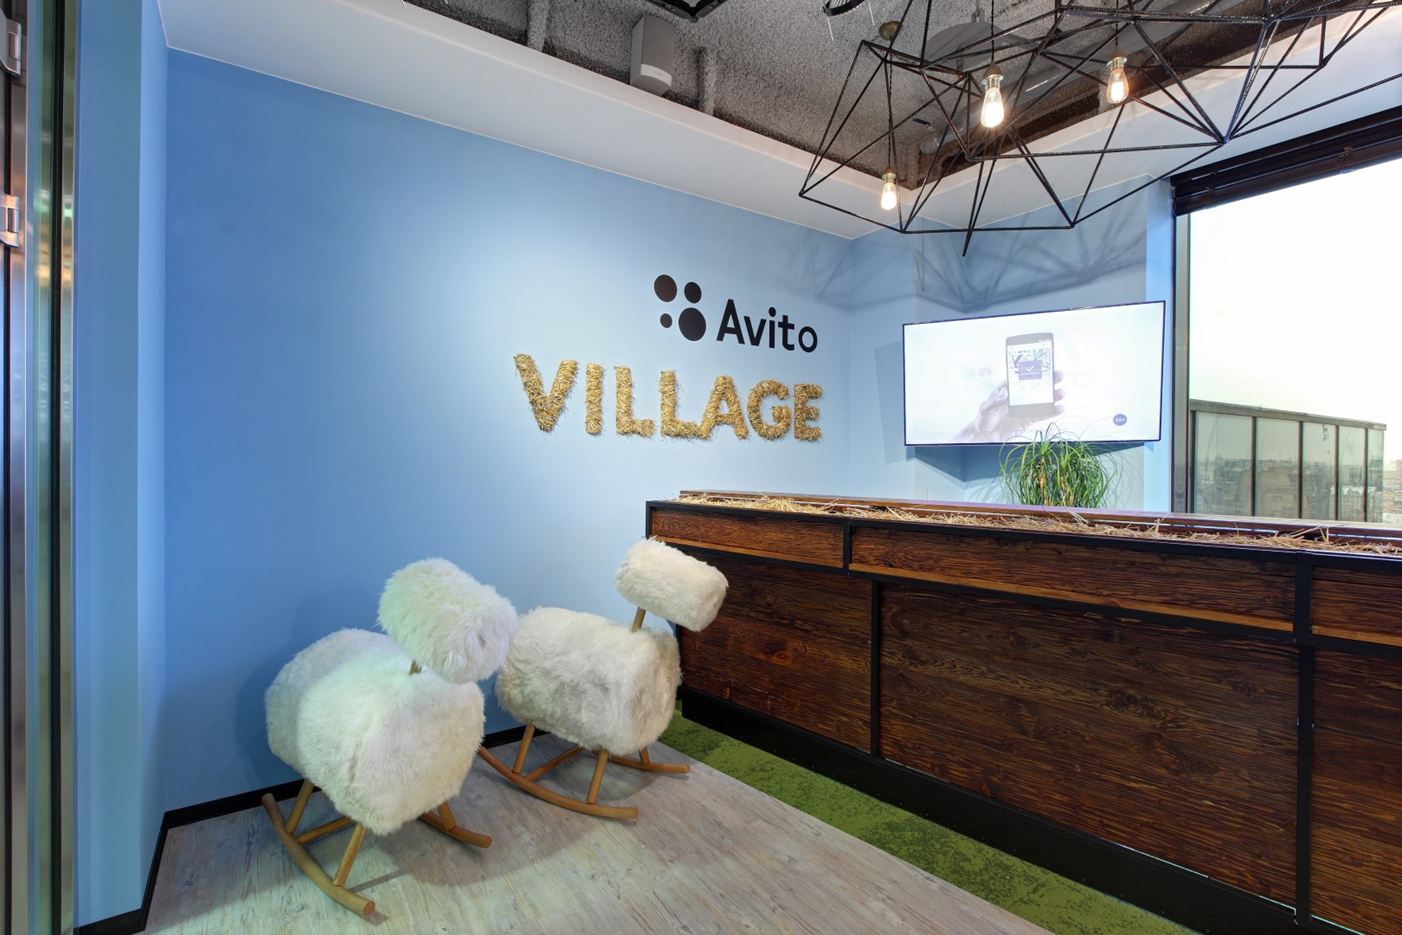 Avito.ru Office in Moscow, Russia by Meandre